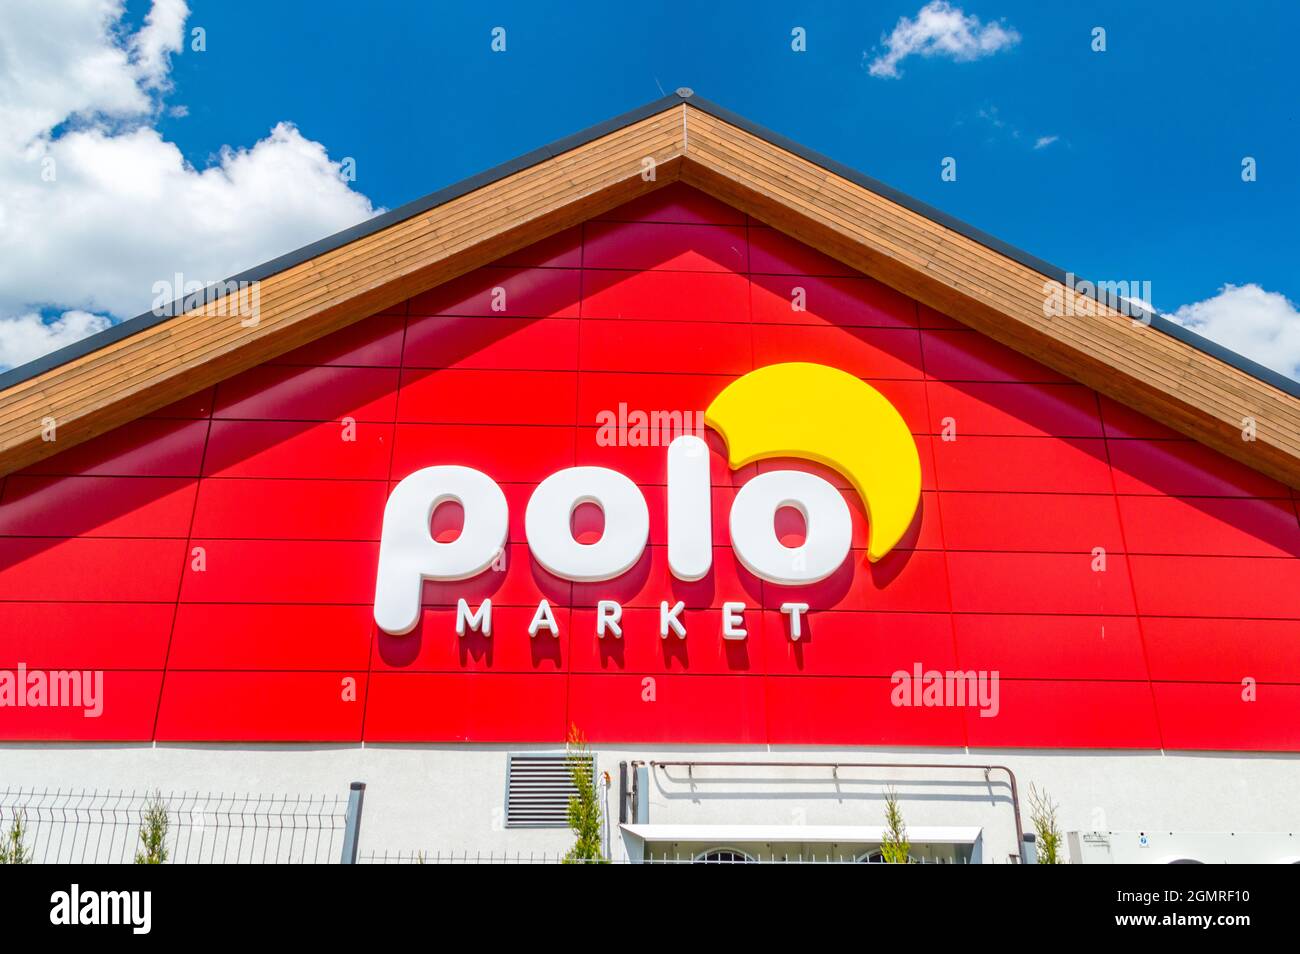 Szczyrk, Poland - June 6, 2021: Logo and sign of Polomarket. Polomarket is  a retail chain of grocery stores Stock Photo - Alamy